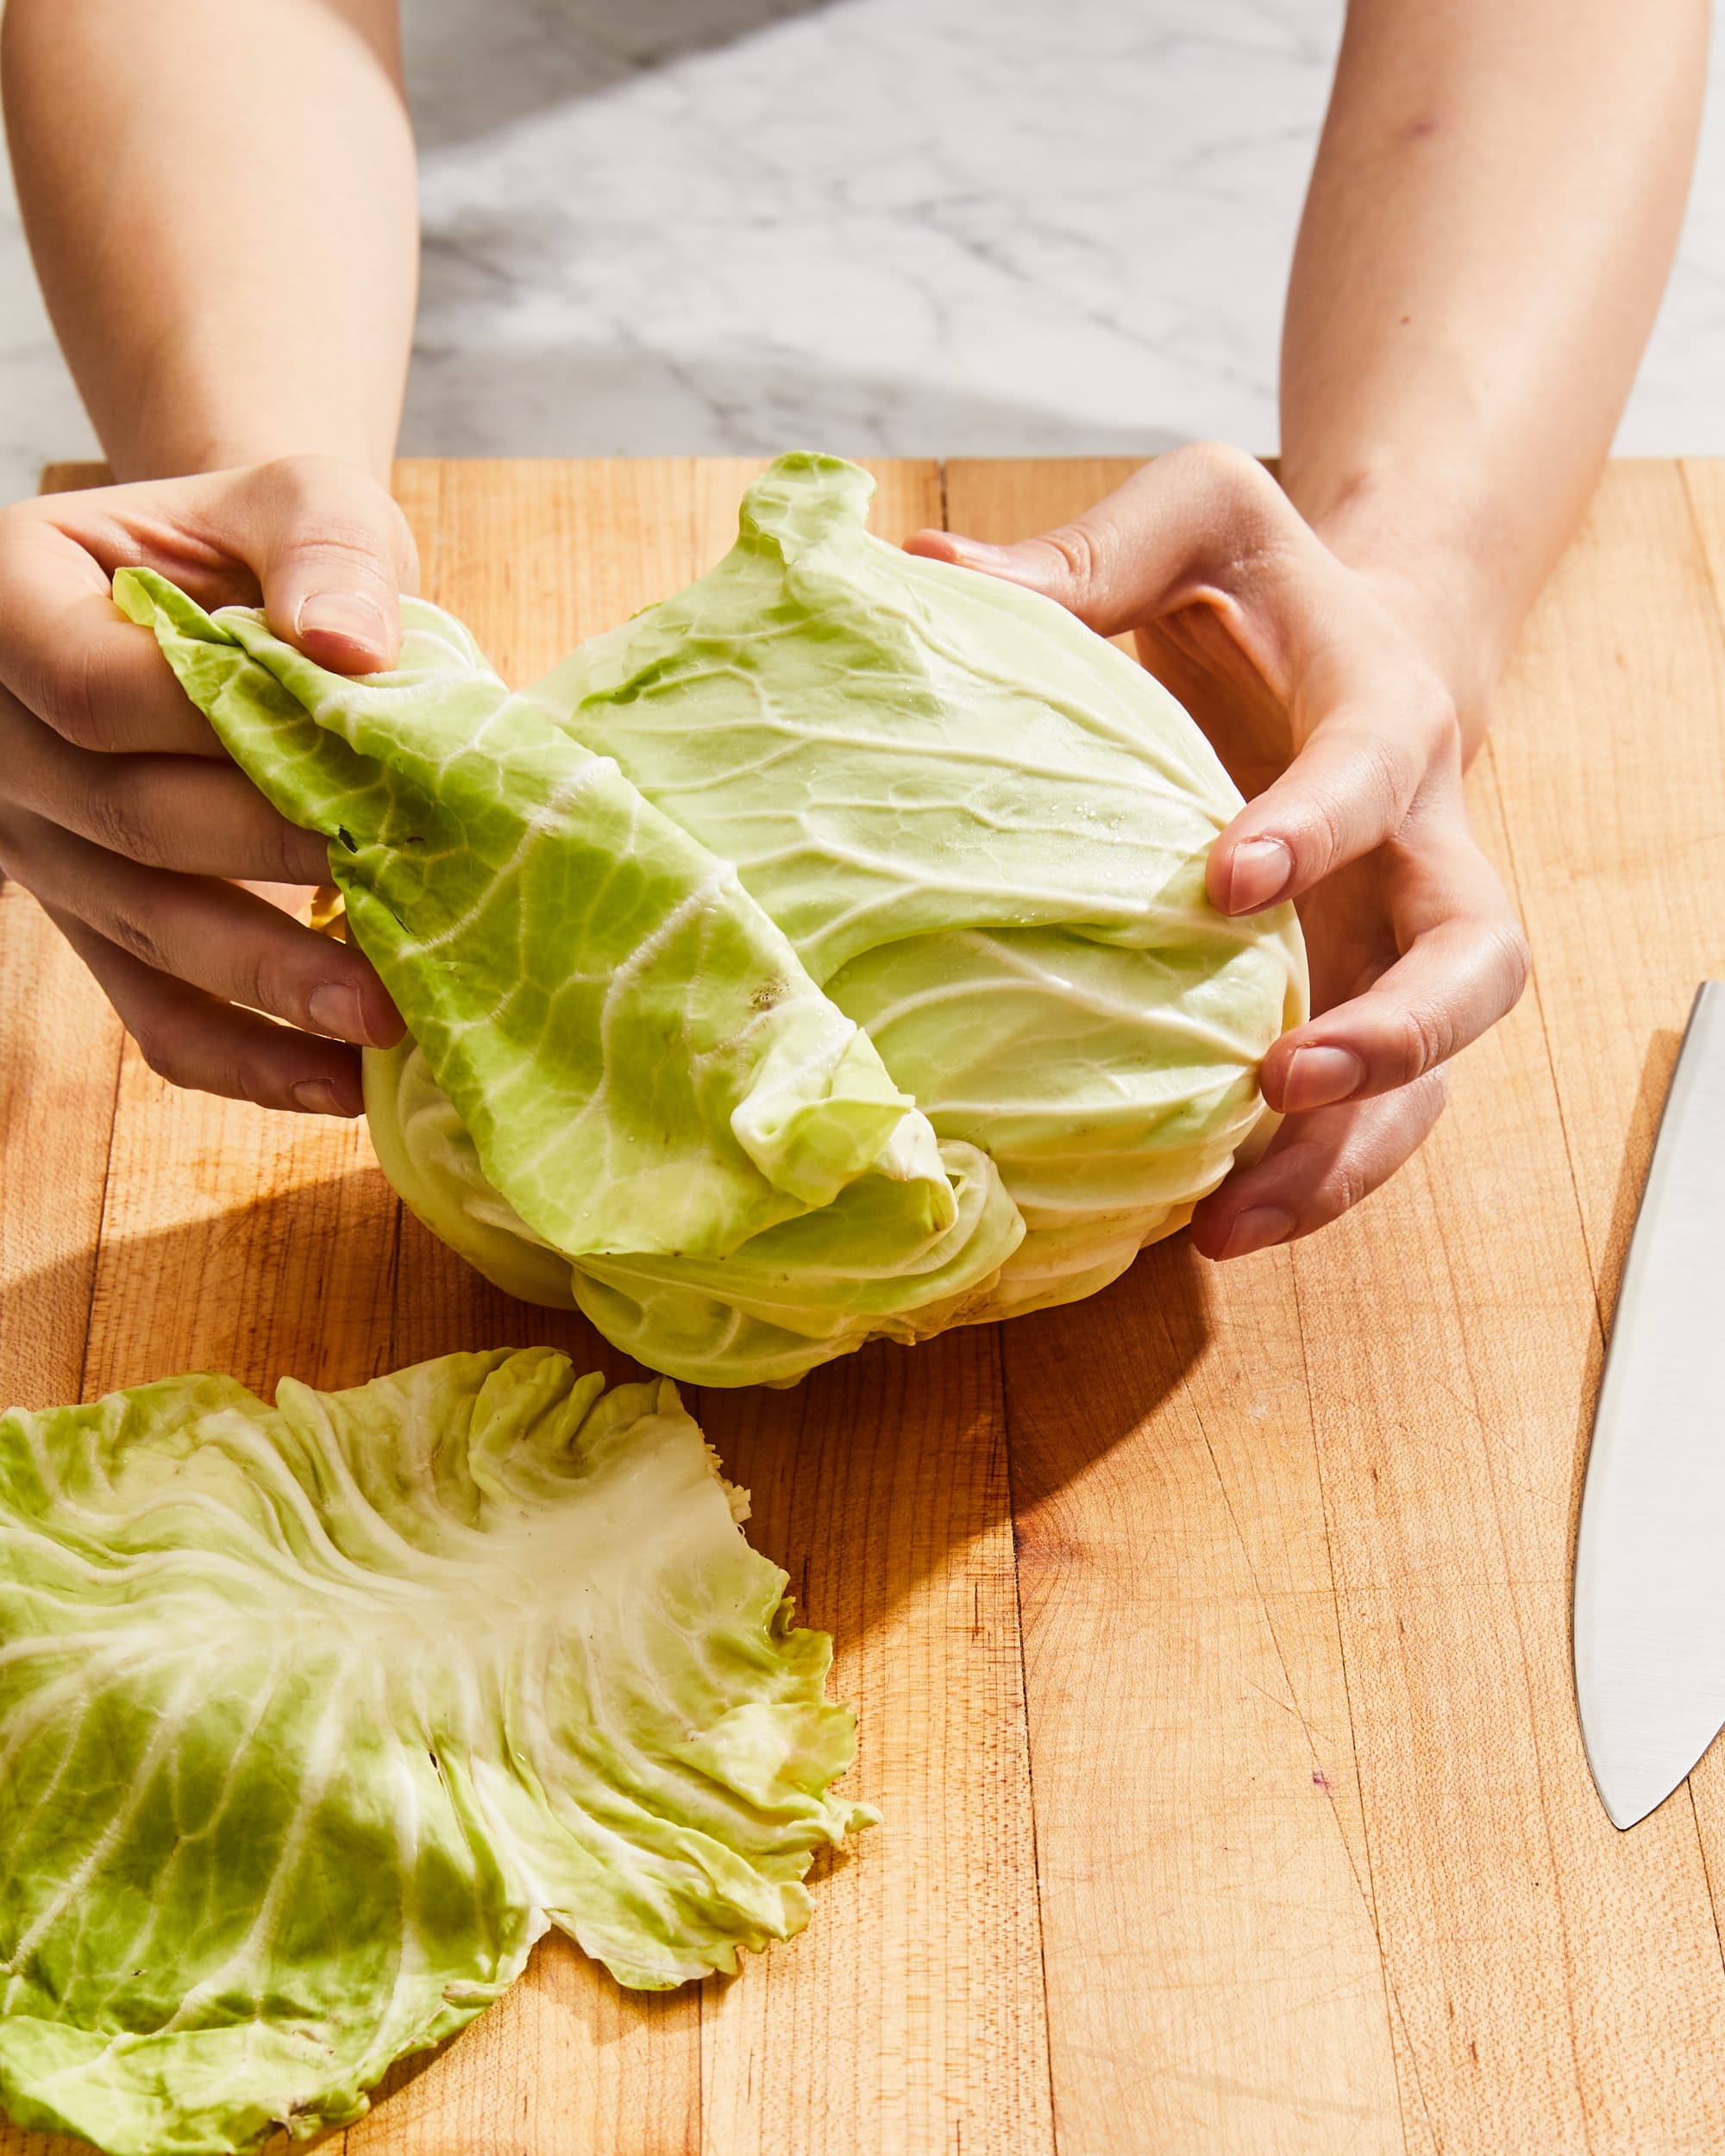 https://cdn.apartmenttherapy.info/image/upload/v1671732556/k/Photo/Tips/2023-02-How-to-Cut-Cabbage/How-to-cut-cabbage-179.jpg